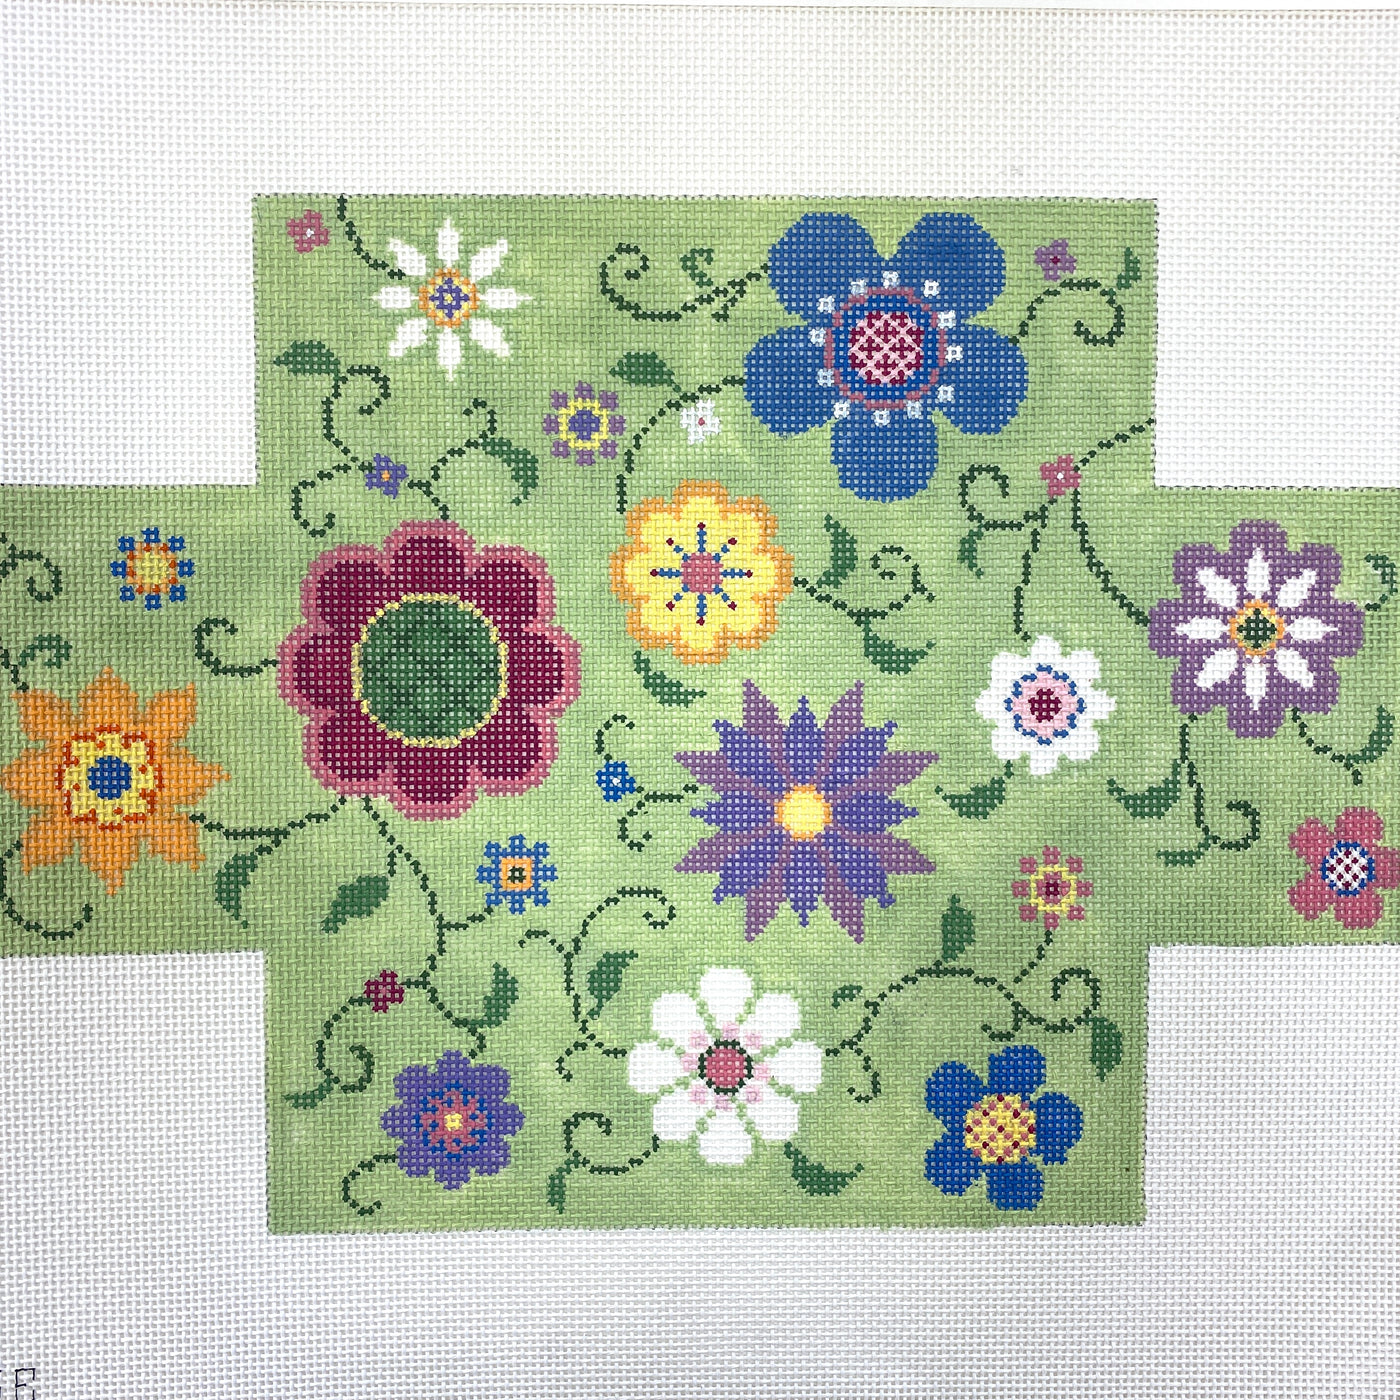 Flower Pops Brick Cover Needlepoint Canvas